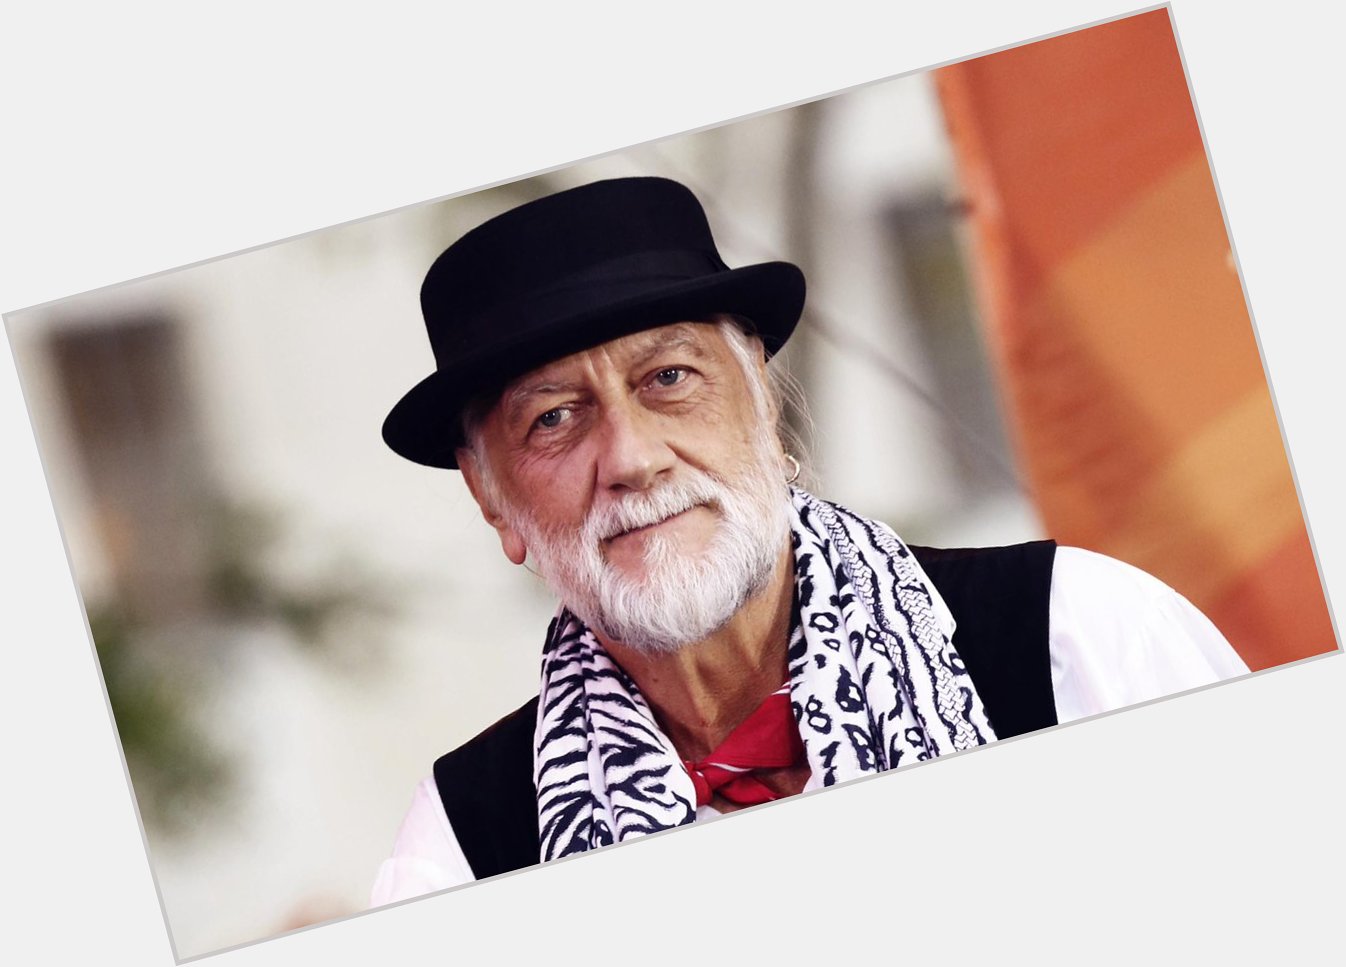 Happy Birthday Mick Fleetwood! Born on this date in 1947. 